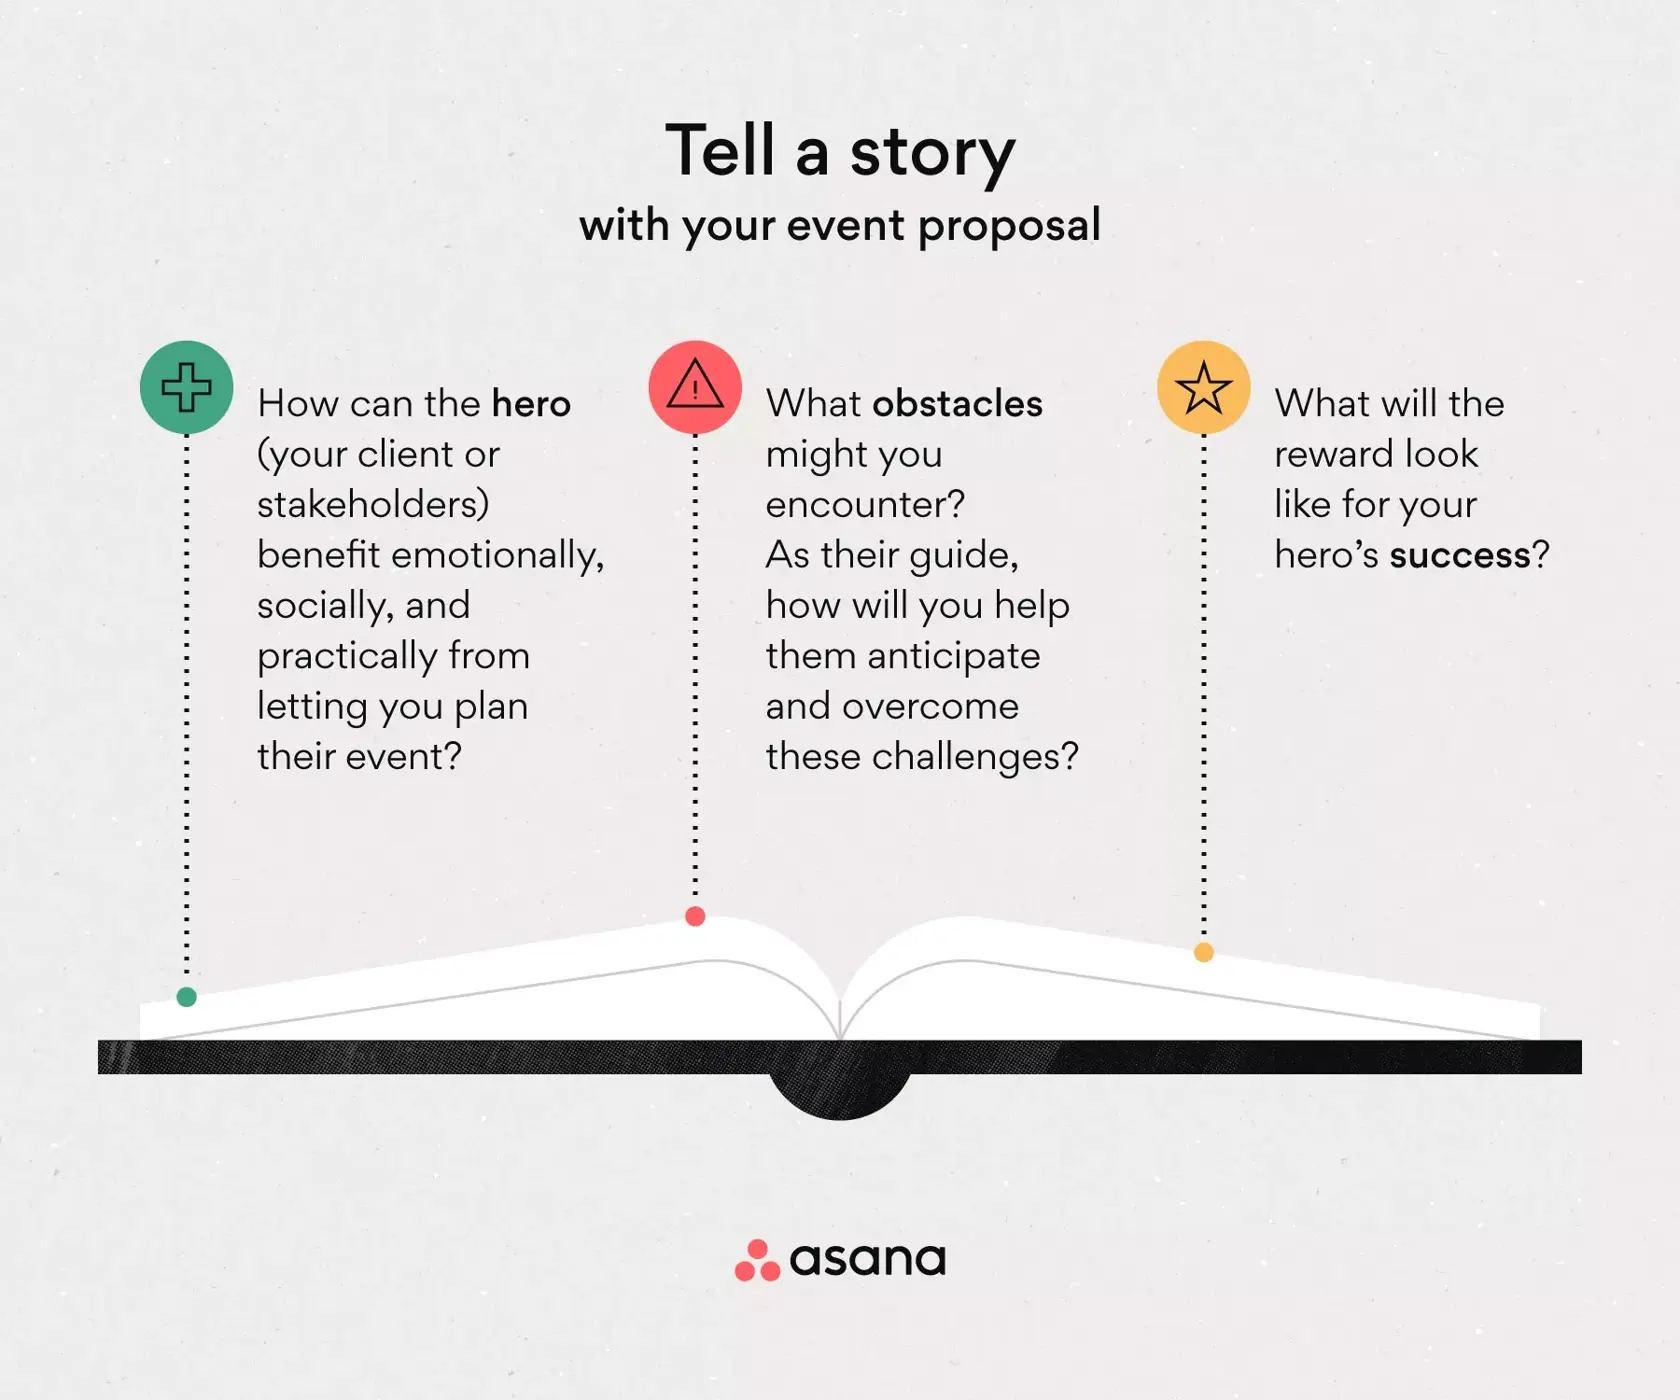 [inline illustration] Tell a story with your event proposal (infographic)